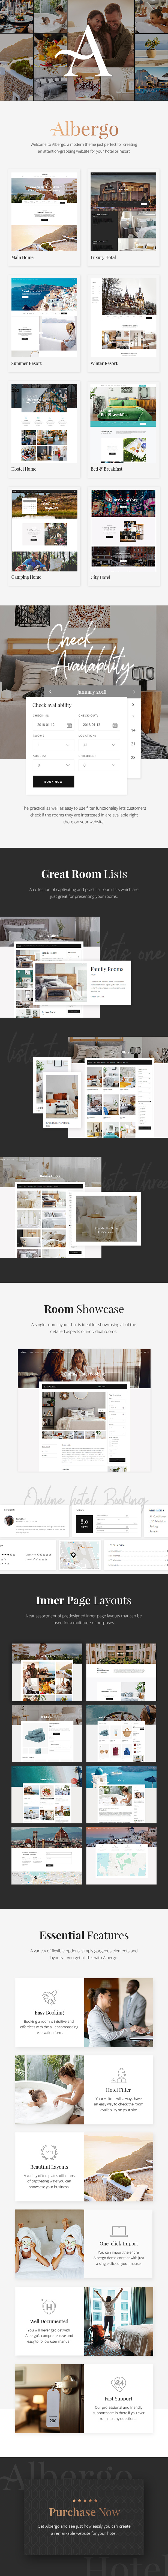 Albergo - Hotel and Accommodation Booking Theme - 1